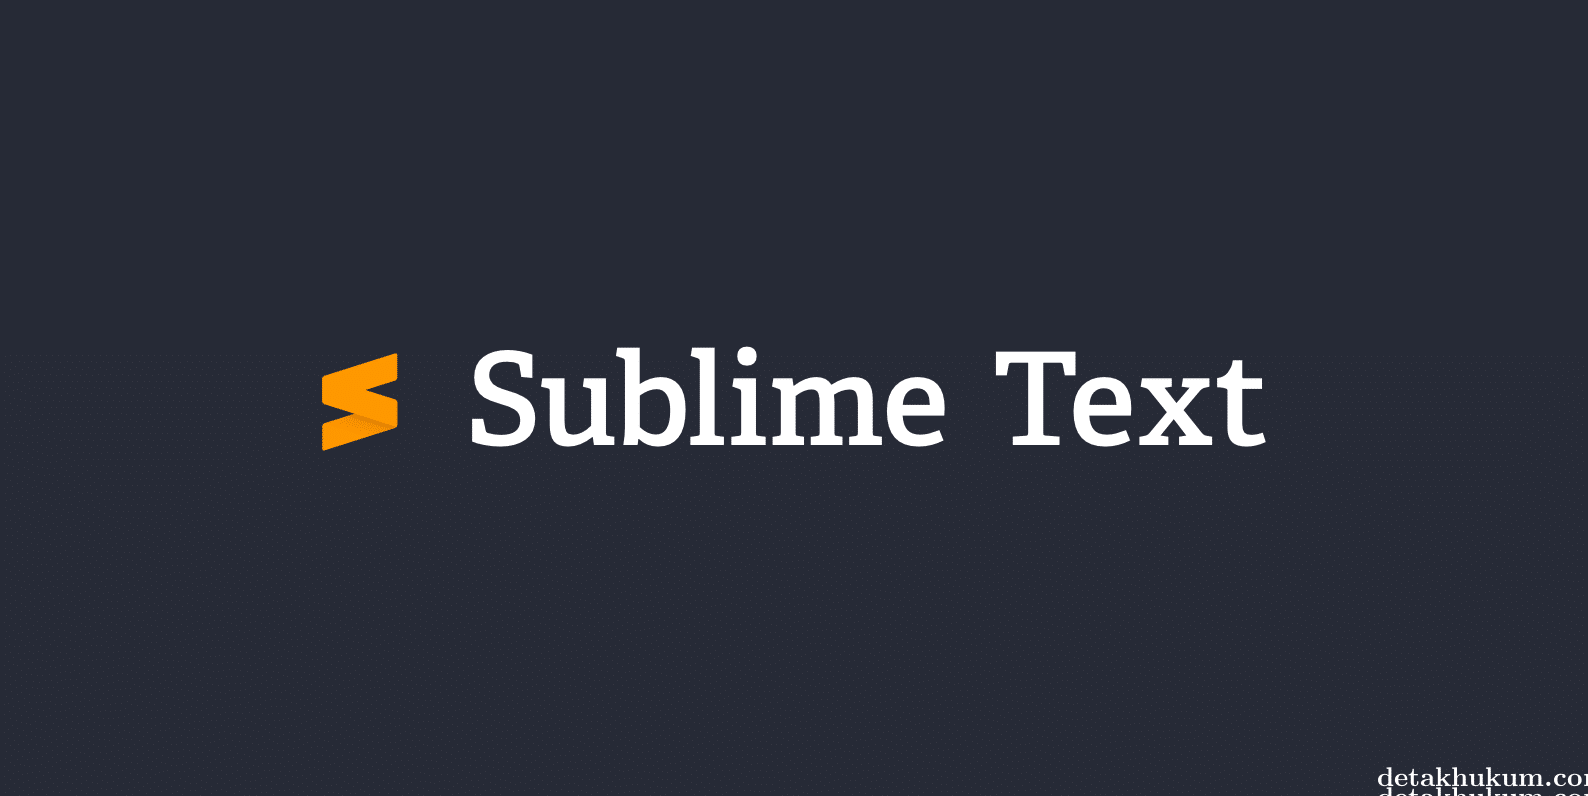 sublime text same window new tab Download Sublime Text 3 Full